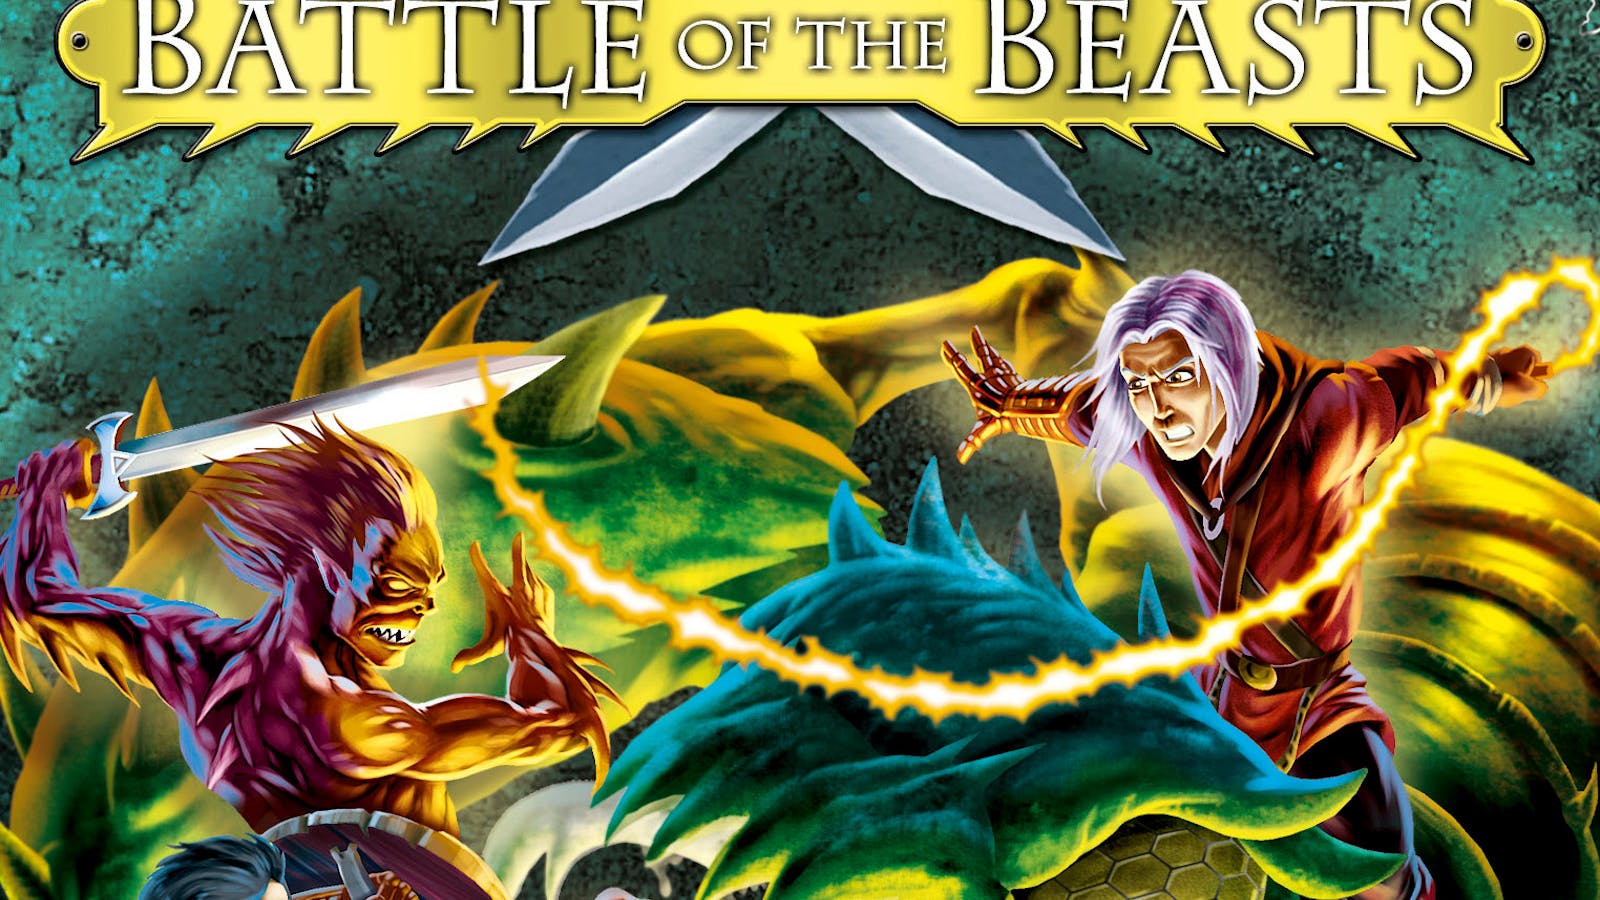 beast quest battle of the beasts amictus vs tagus book